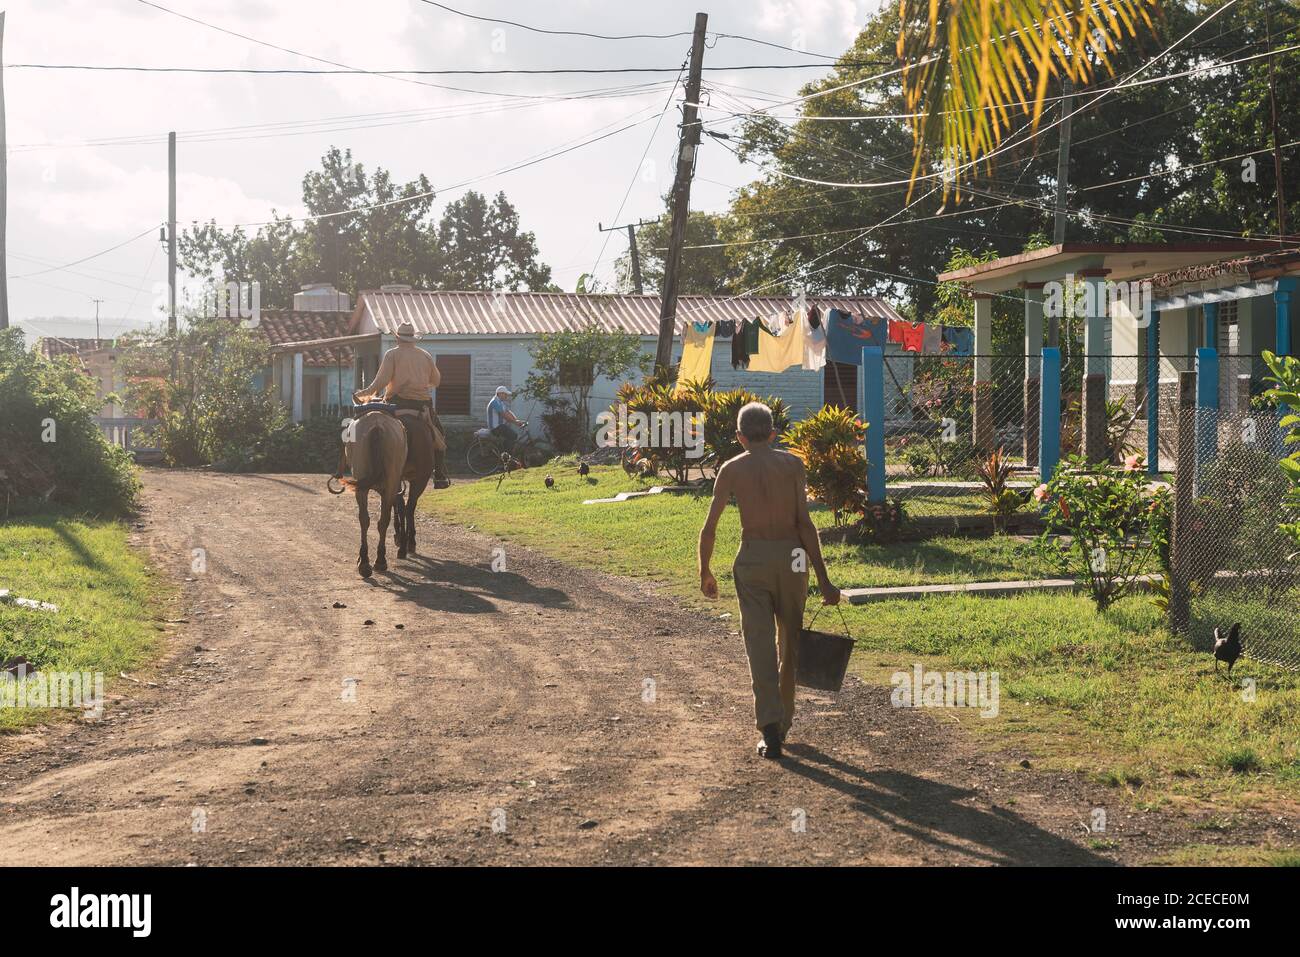 LA HABANA, CUBA - NOVEMBER, 6 , 2018: Back view male with pail walking on street near man hacking on horse near old buildings in sunny day in Cuba Stock Photo